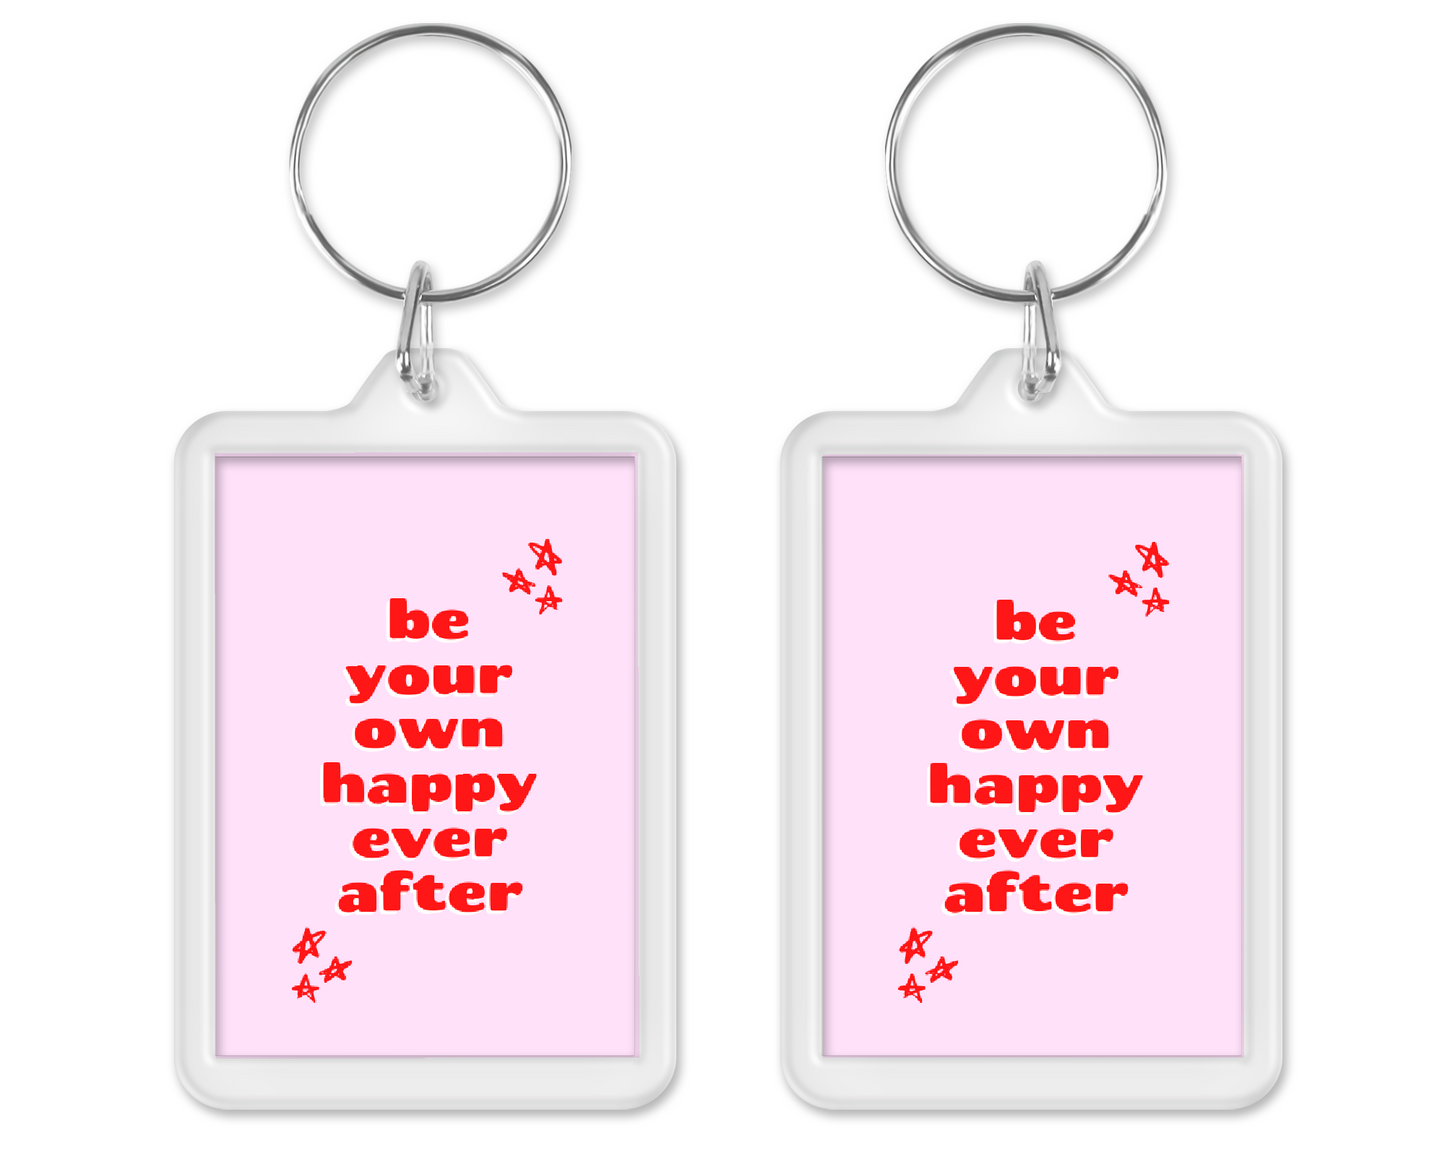 Keyring Gift | Be Your Own Happy Ever After | Positive Quote Keyring | Positive Reminder Gift